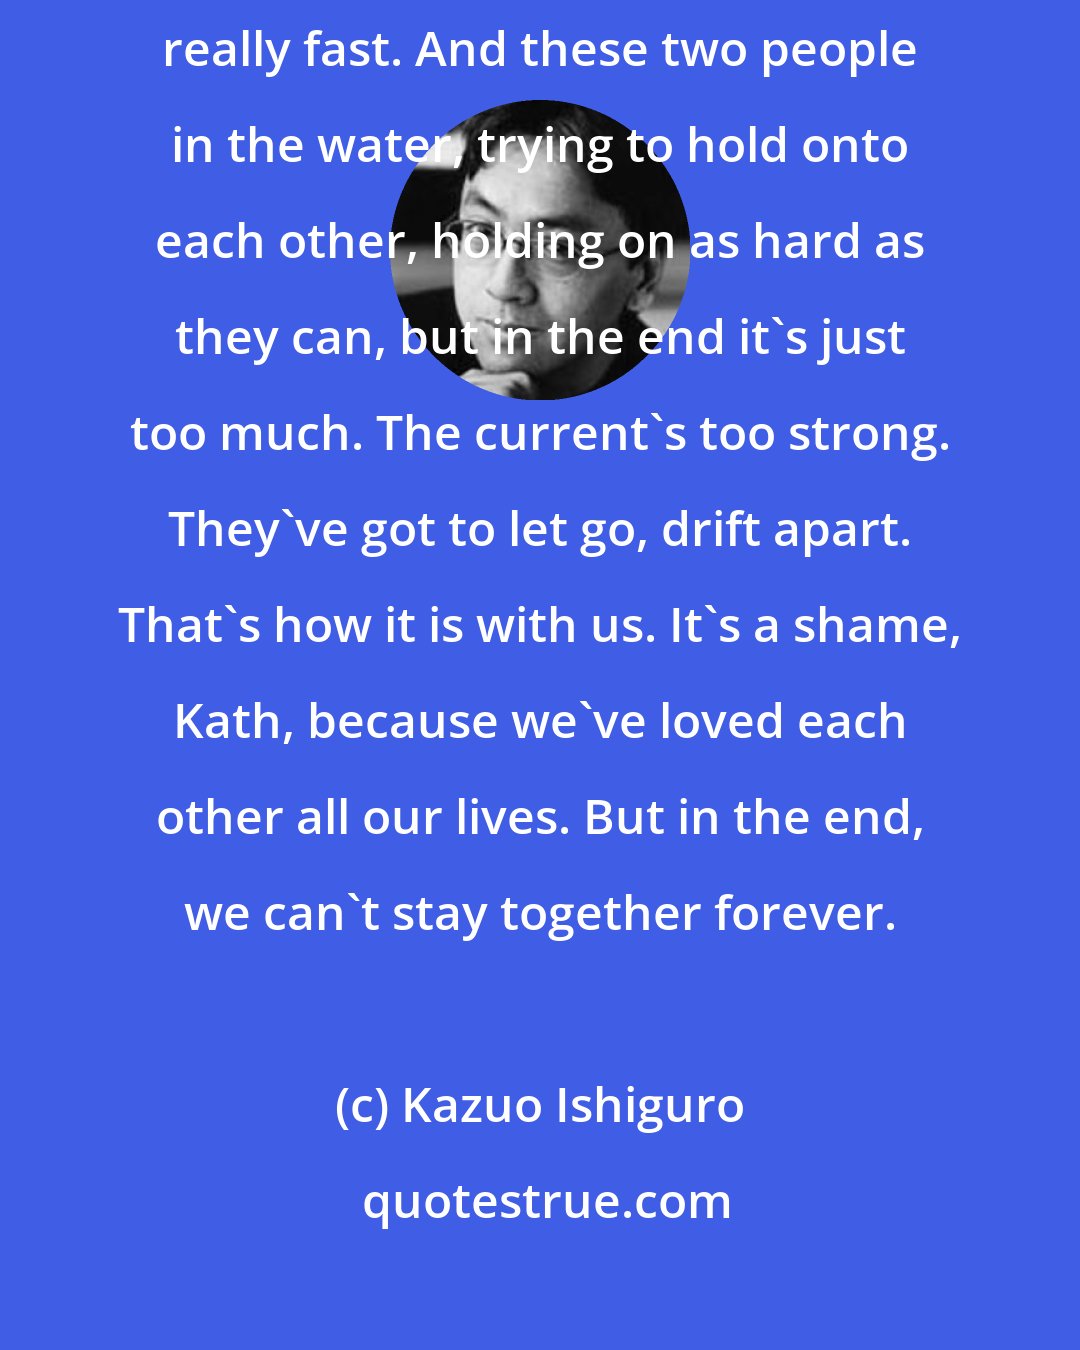 Kazuo Ishiguro: I keep thinking about this river somewhere, with the water moving really fast. And these two people in the water, trying to hold onto each other, holding on as hard as they can, but in the end it's just too much. The current's too strong. They've got to let go, drift apart. That's how it is with us. It's a shame, Kath, because we've loved each other all our lives. But in the end, we can't stay together forever.